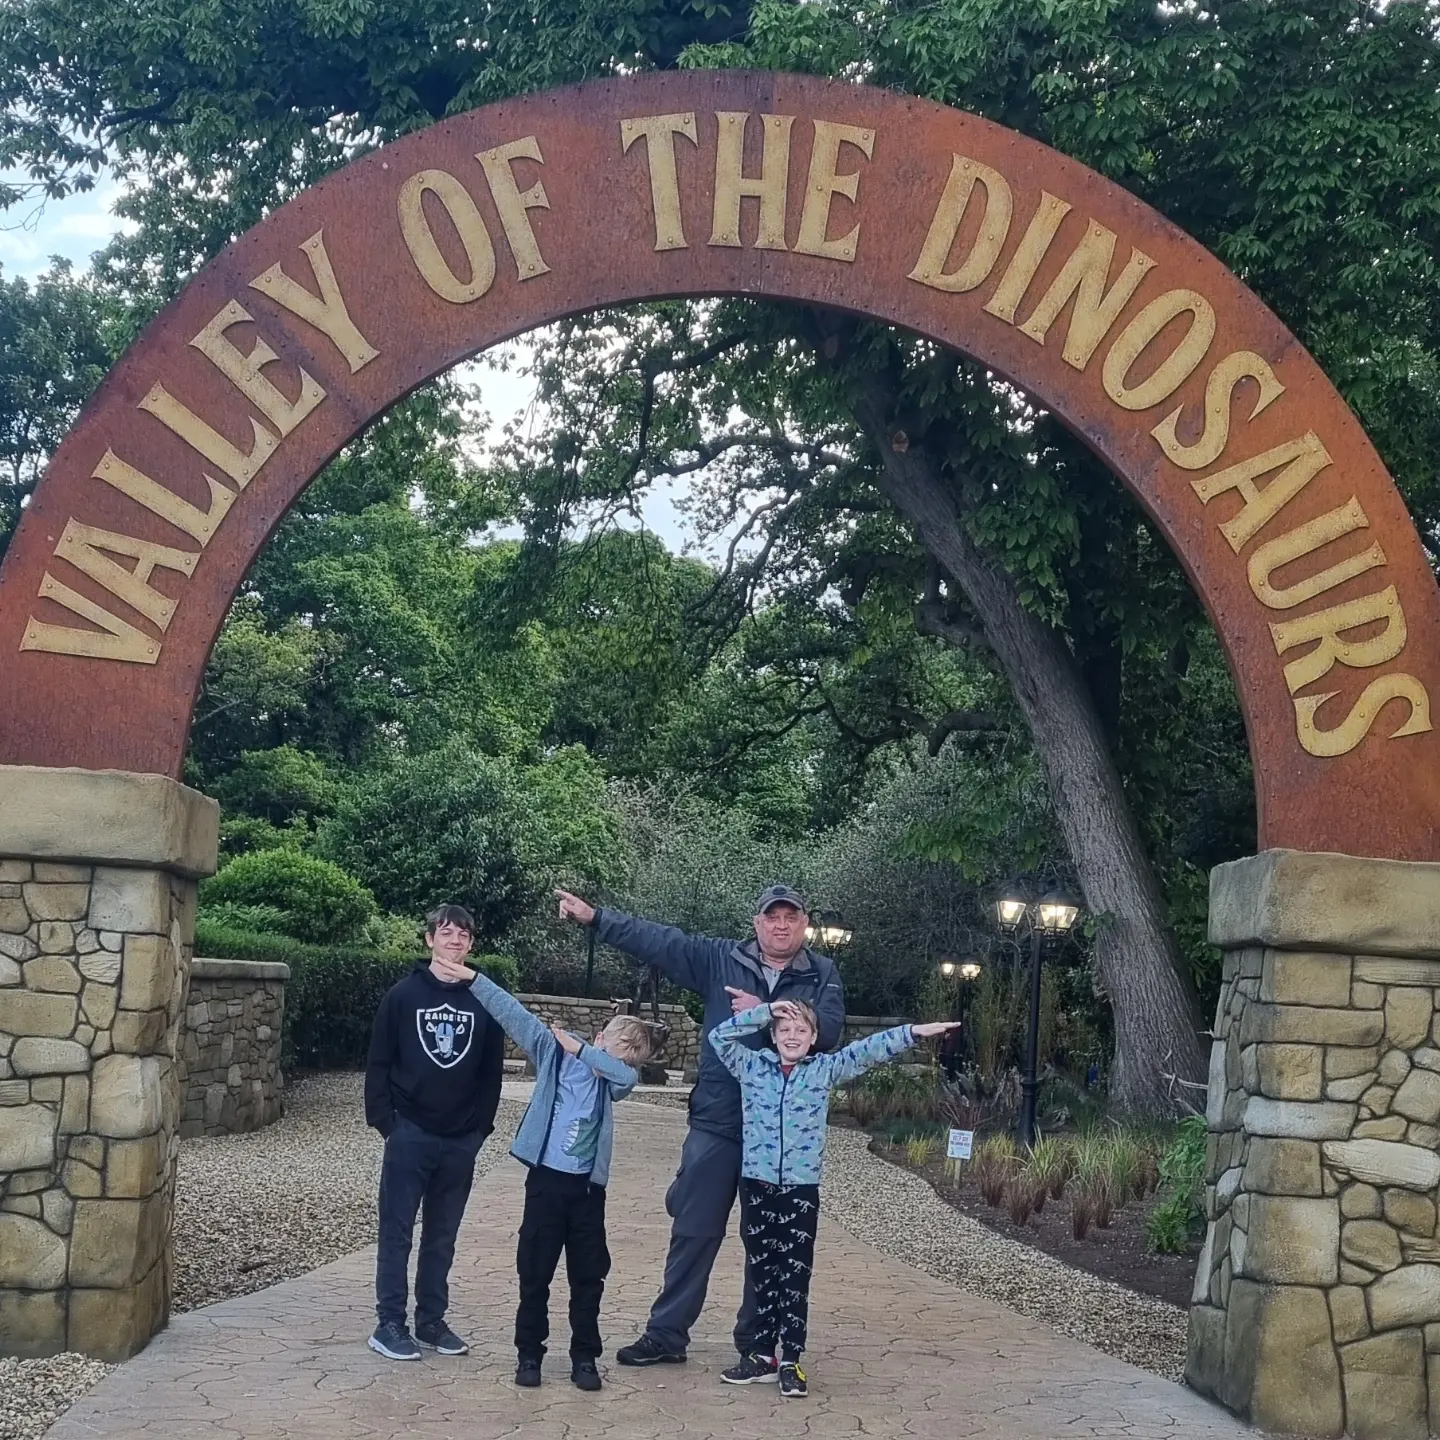 Roarr Valley of the dinosaurs